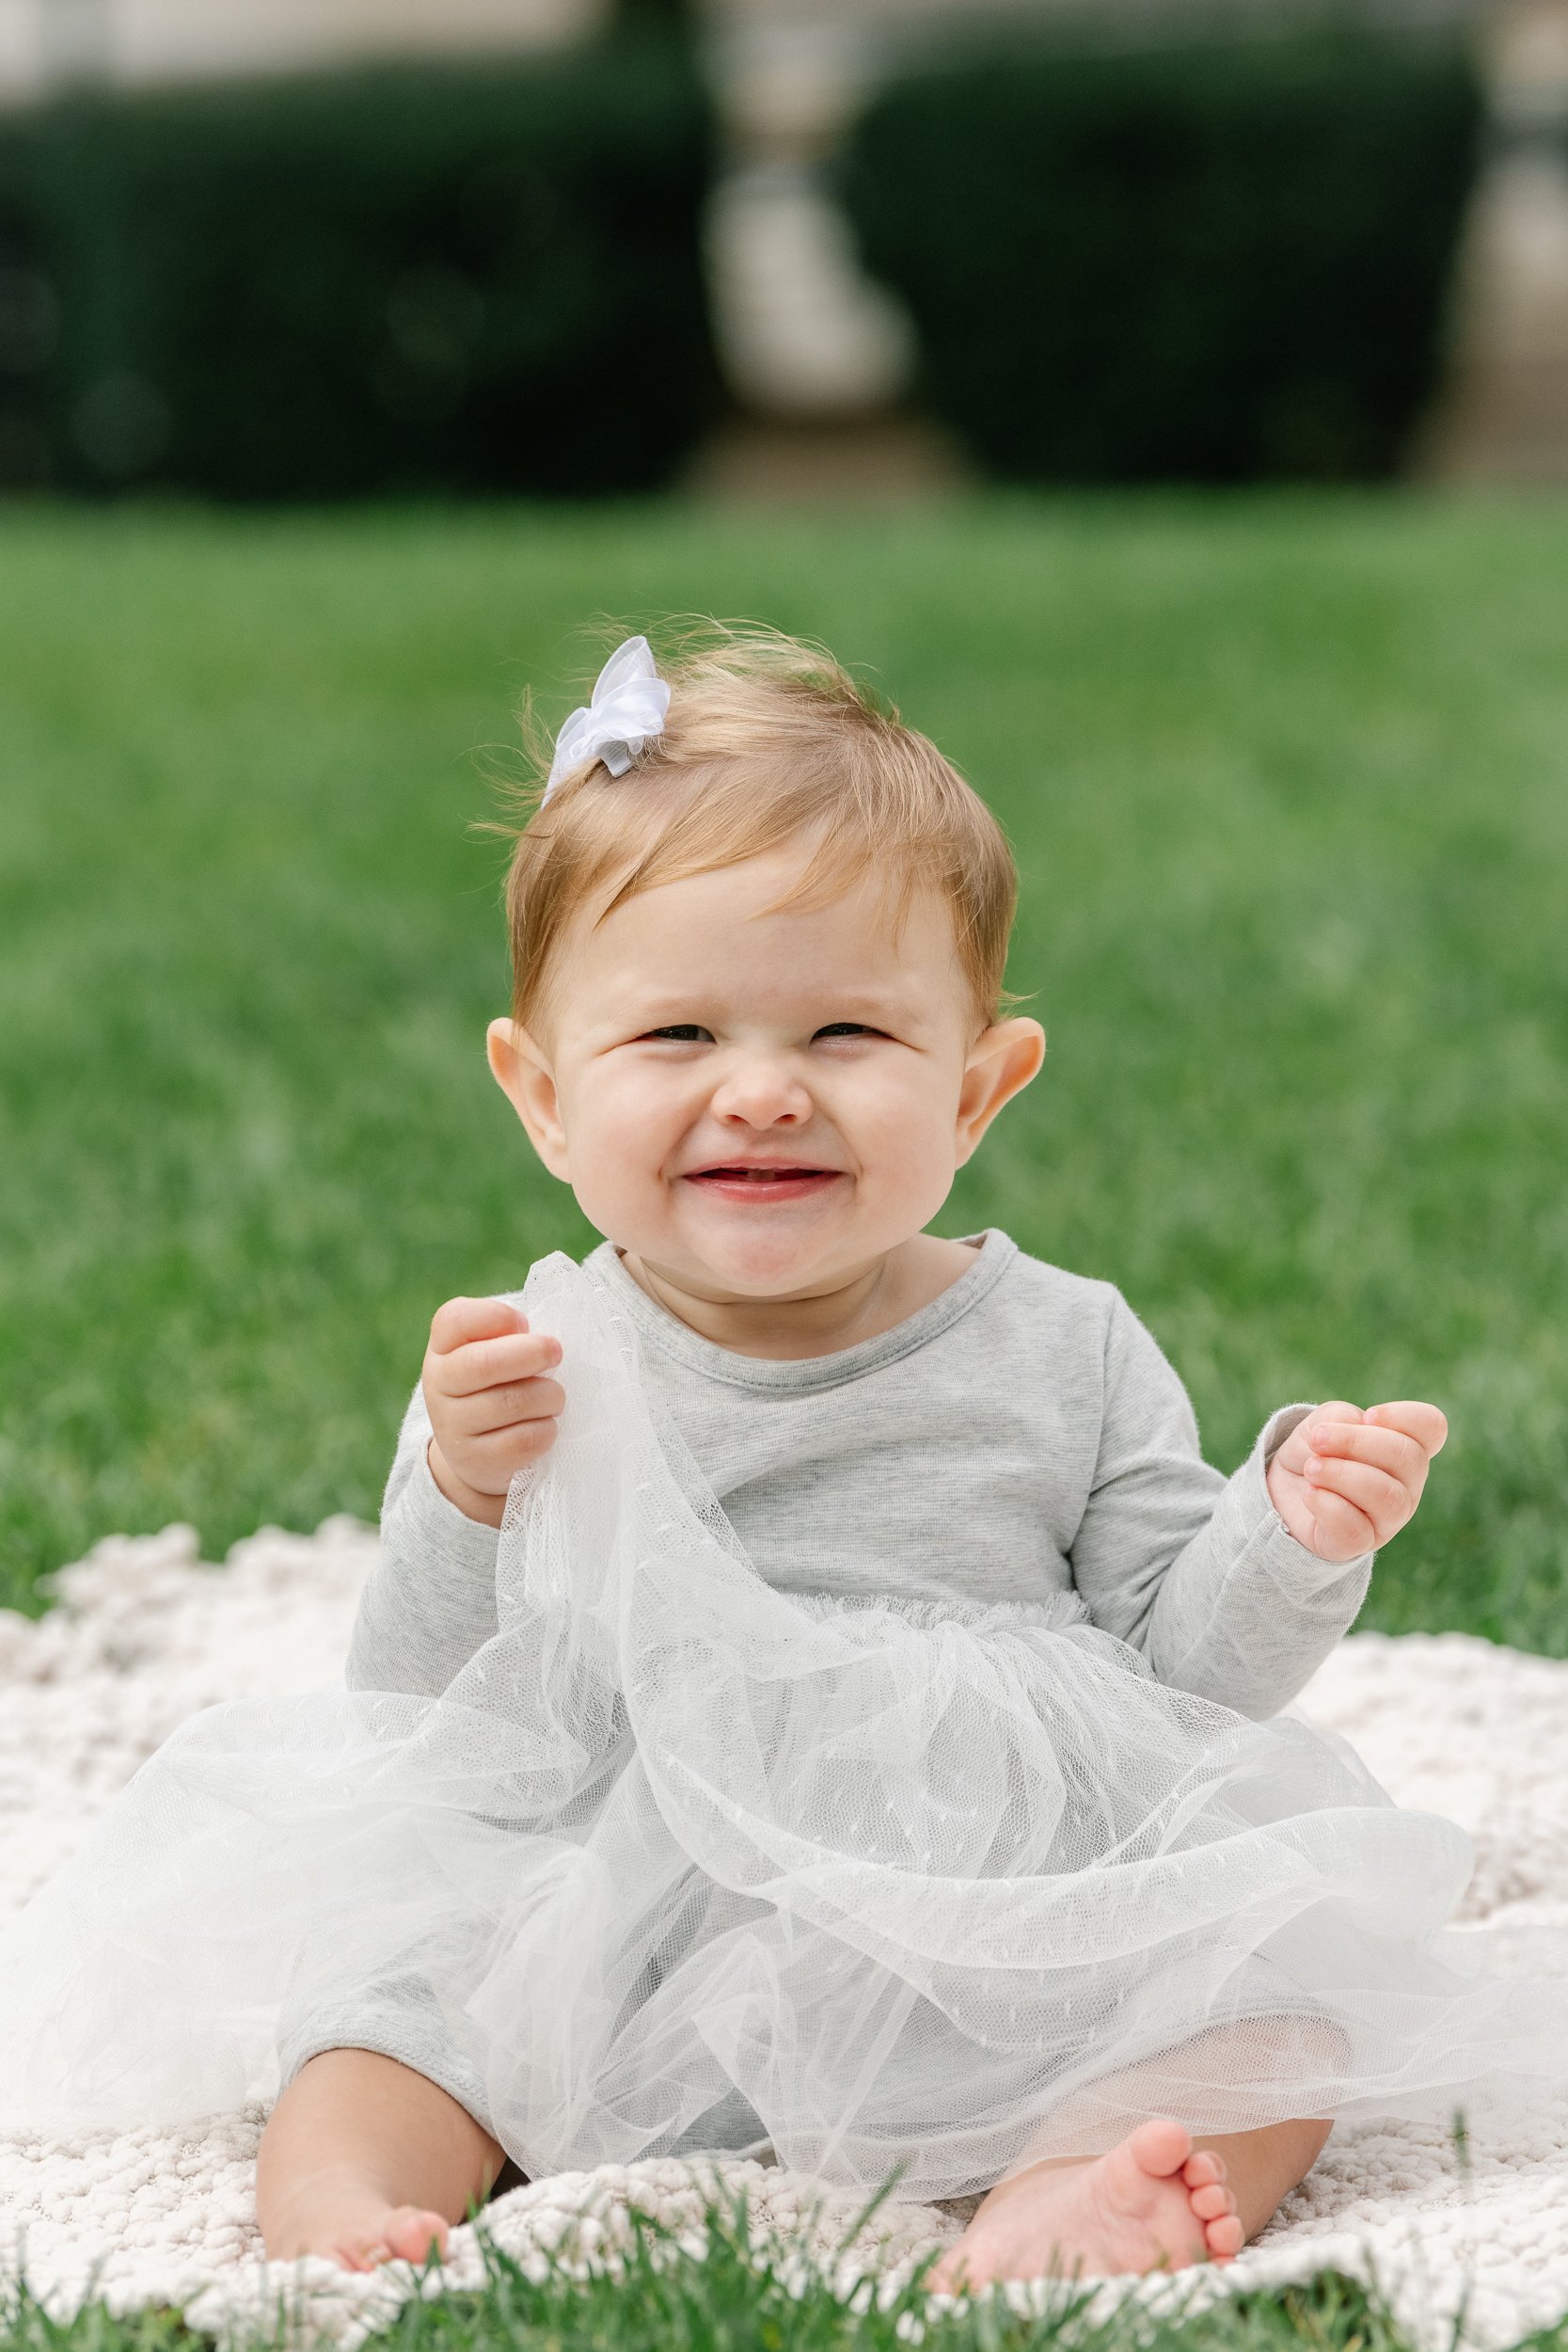  Nicole Hawkins Photography captures an infant girl sitting on a blanket wearing a gray sweater tulle dress. infant style NJ infant milestone pics #nicolehawkinsphotography #newjerseyphotographers #familyphotographer #6monthportraits #NJfamilyphotos 